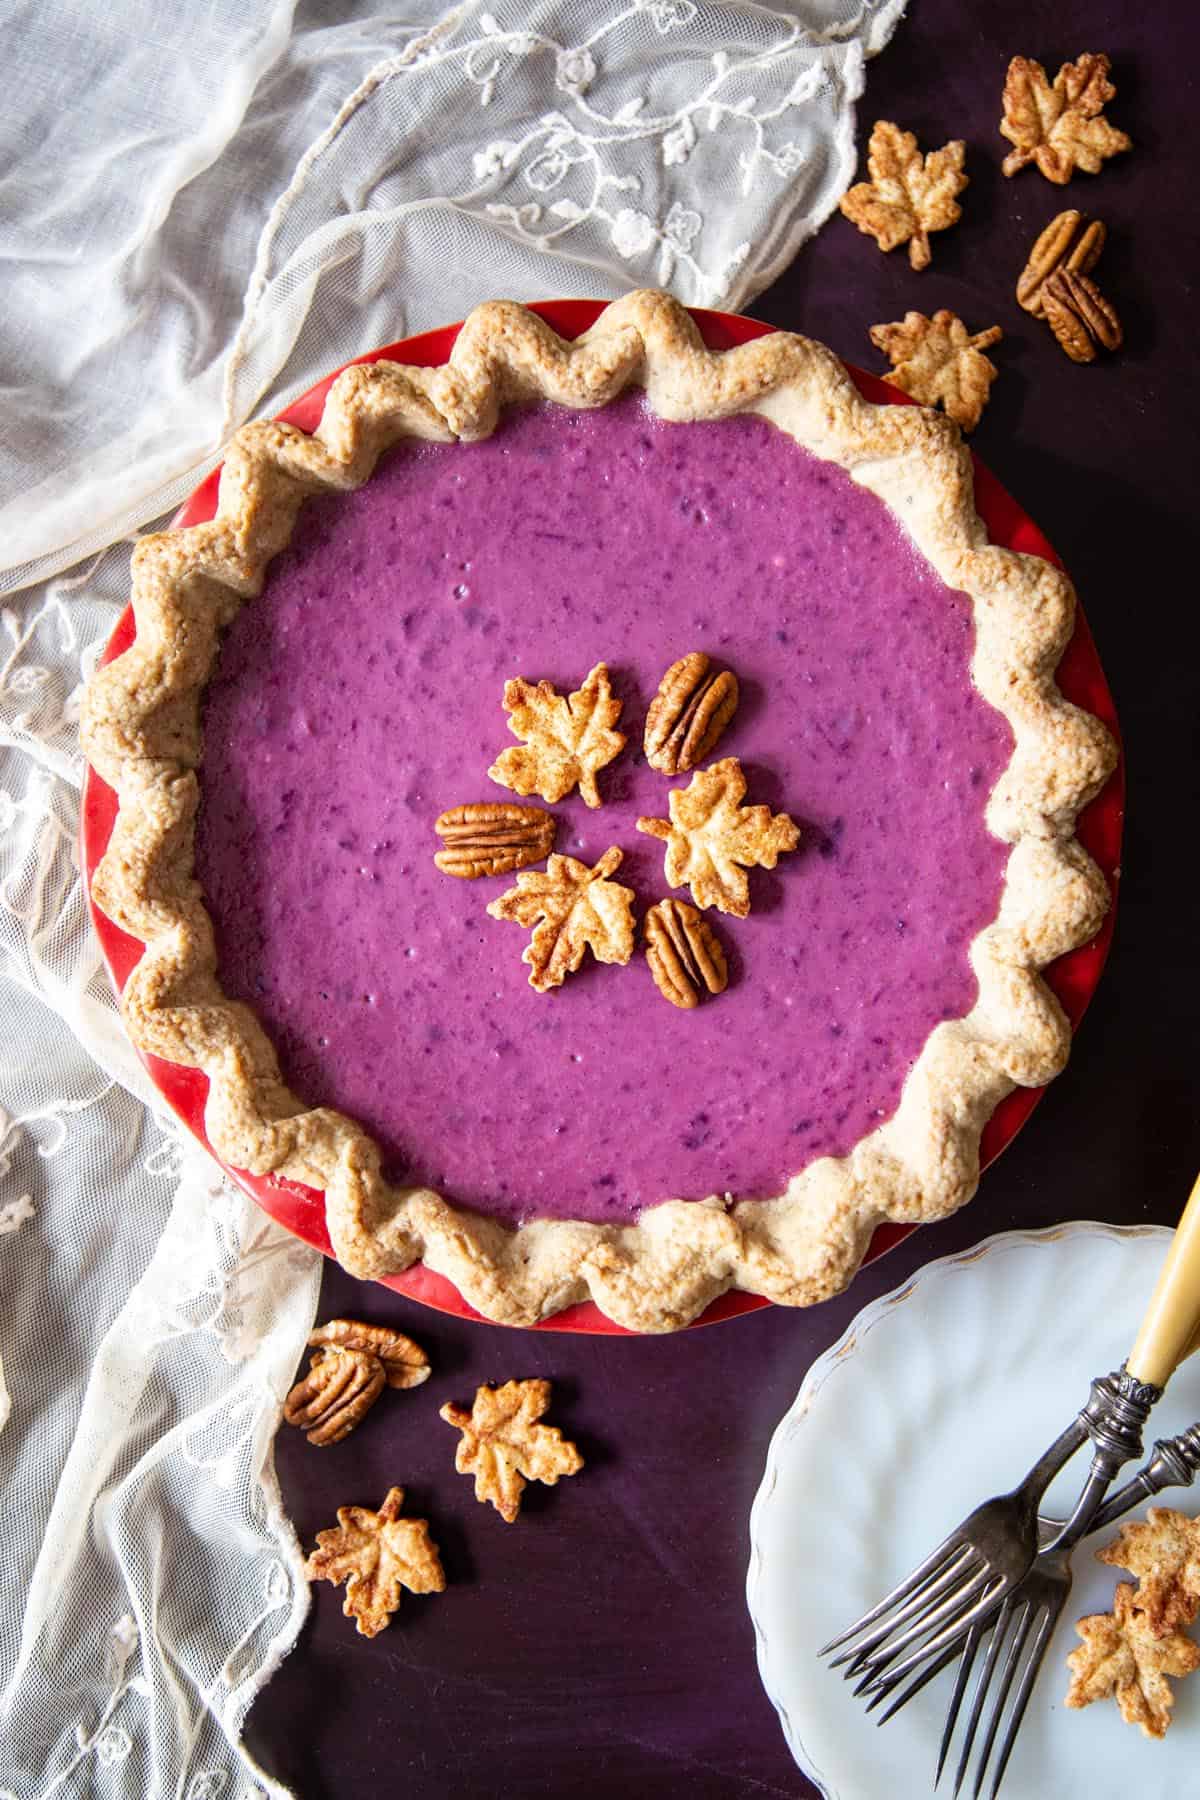 A purple sweet potato pie decorated with maple leaves cookies and pecans.